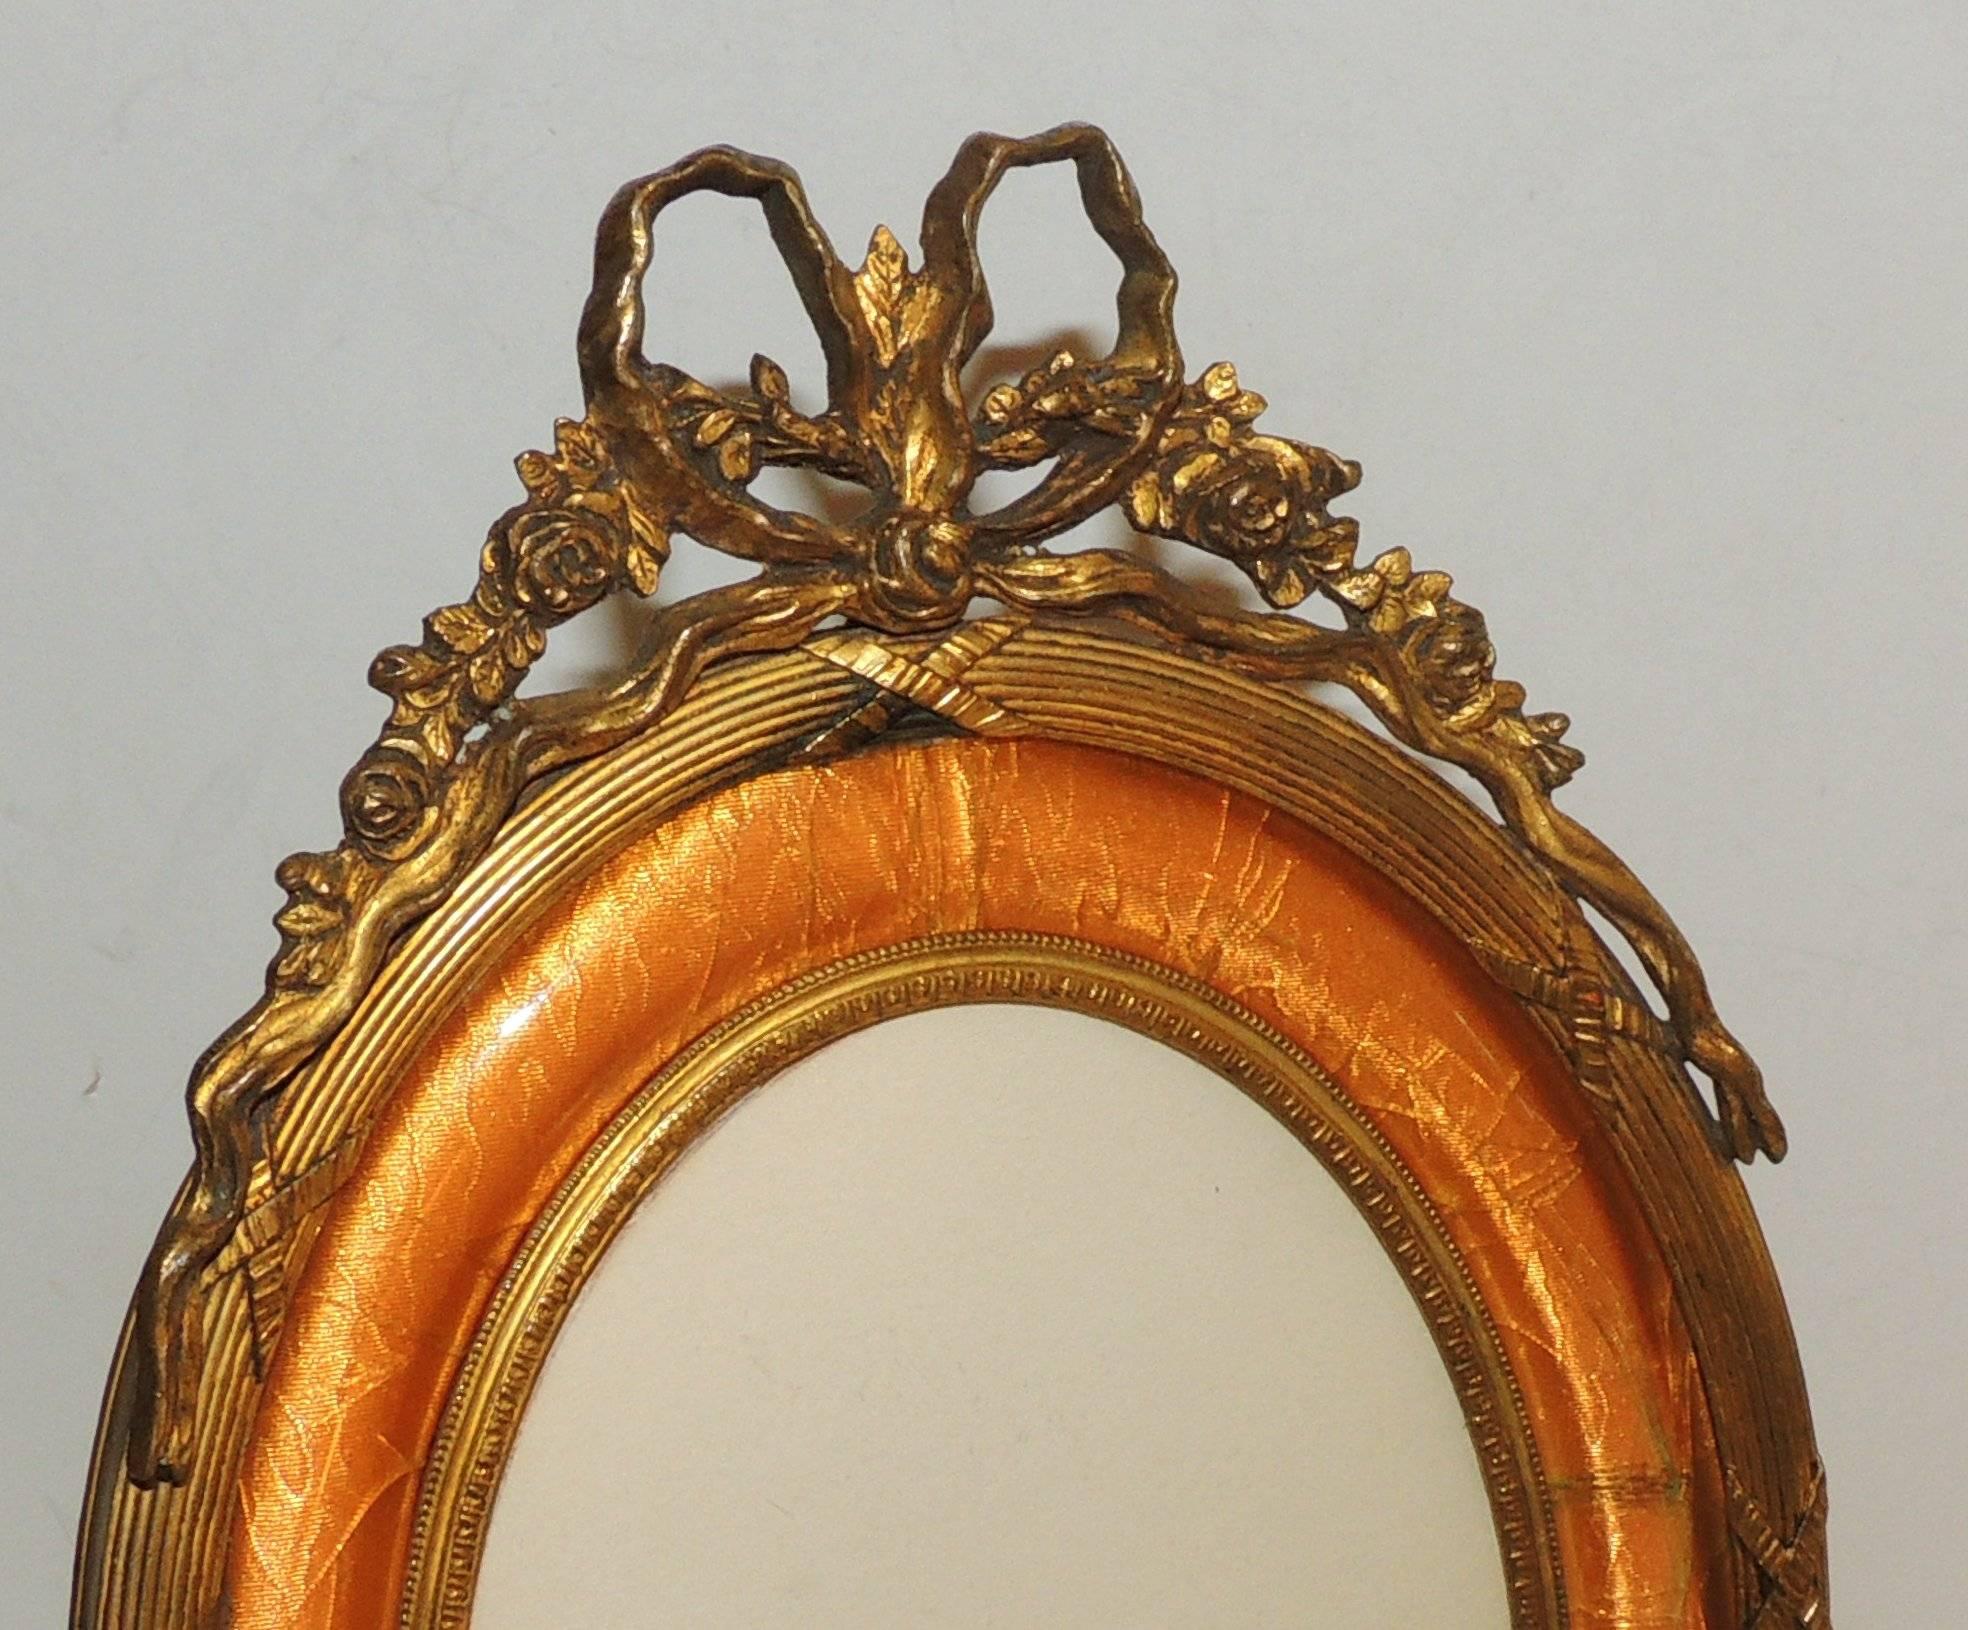 Vintage French bow top doré bronze oval picture frame with peach enamel frame with beautiful engravings and scroll details.
Original bronze stand.

Measures: 9.5